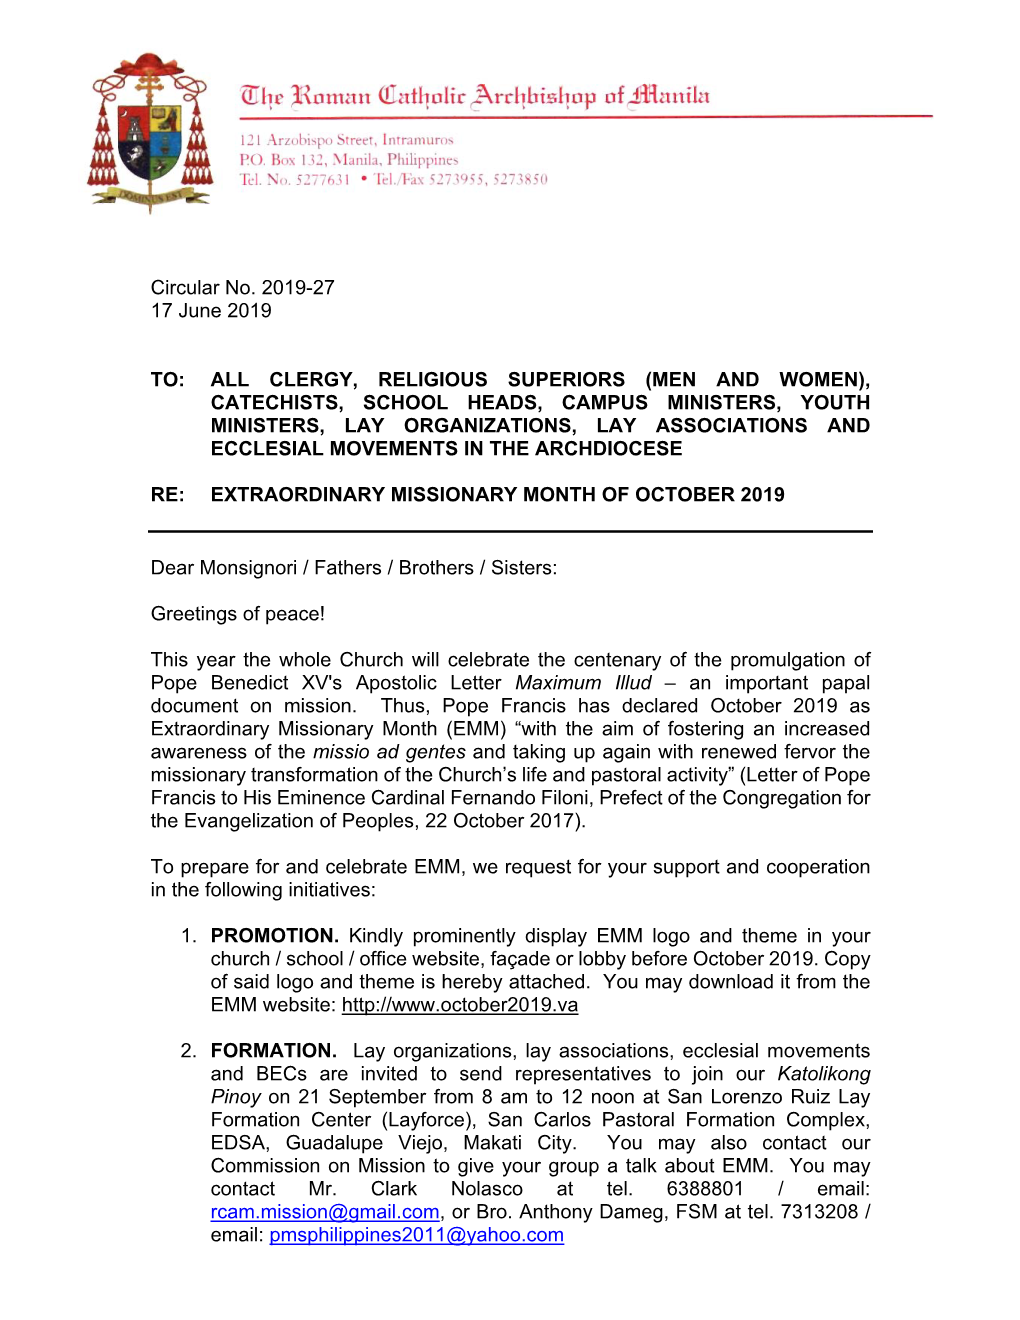 Circular Letter for the Extraordinary Missionary Month of October 2019